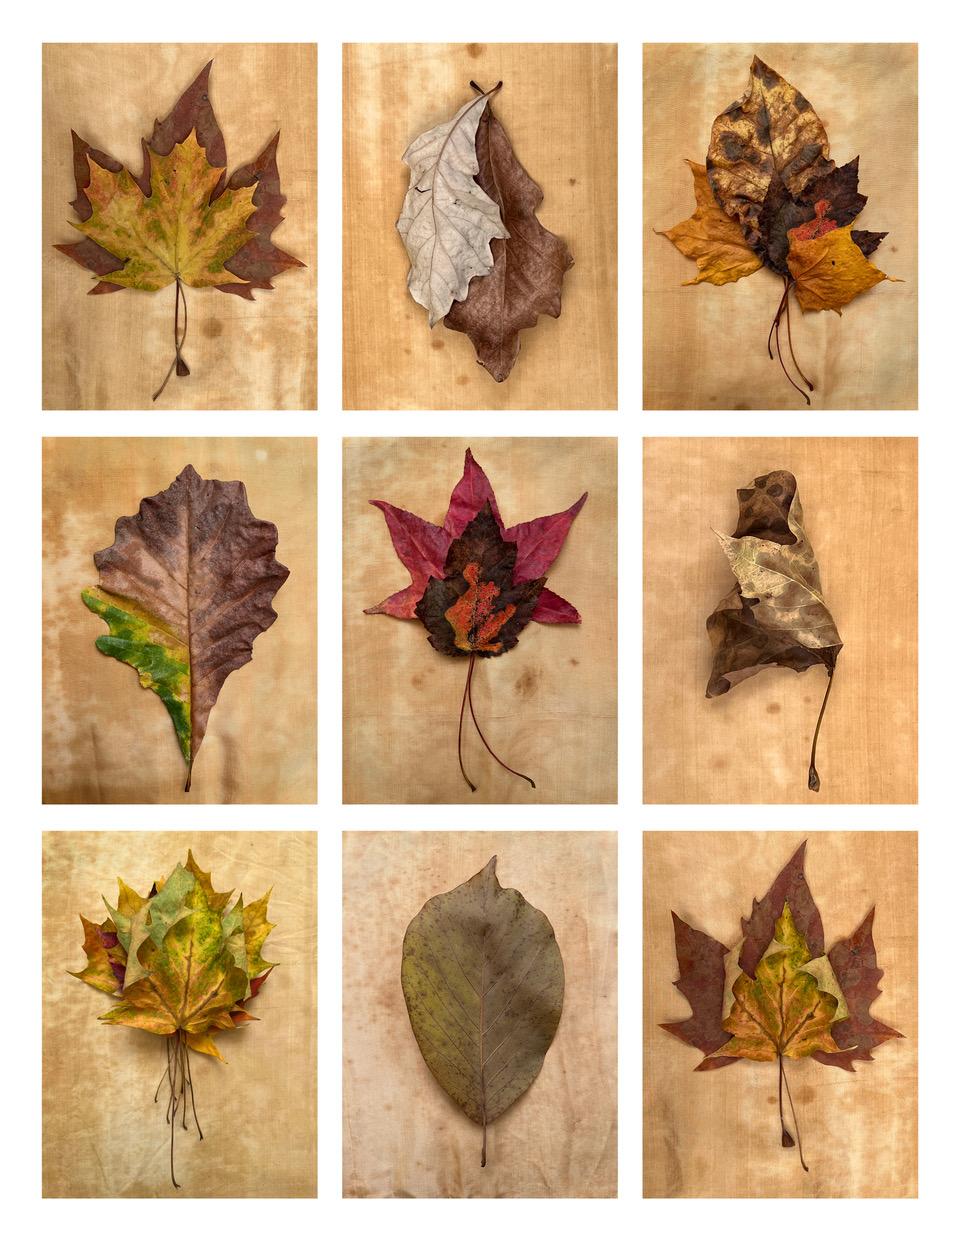 Nine Leaves: grid w/ nature still life leaf photographs in gold, red, green